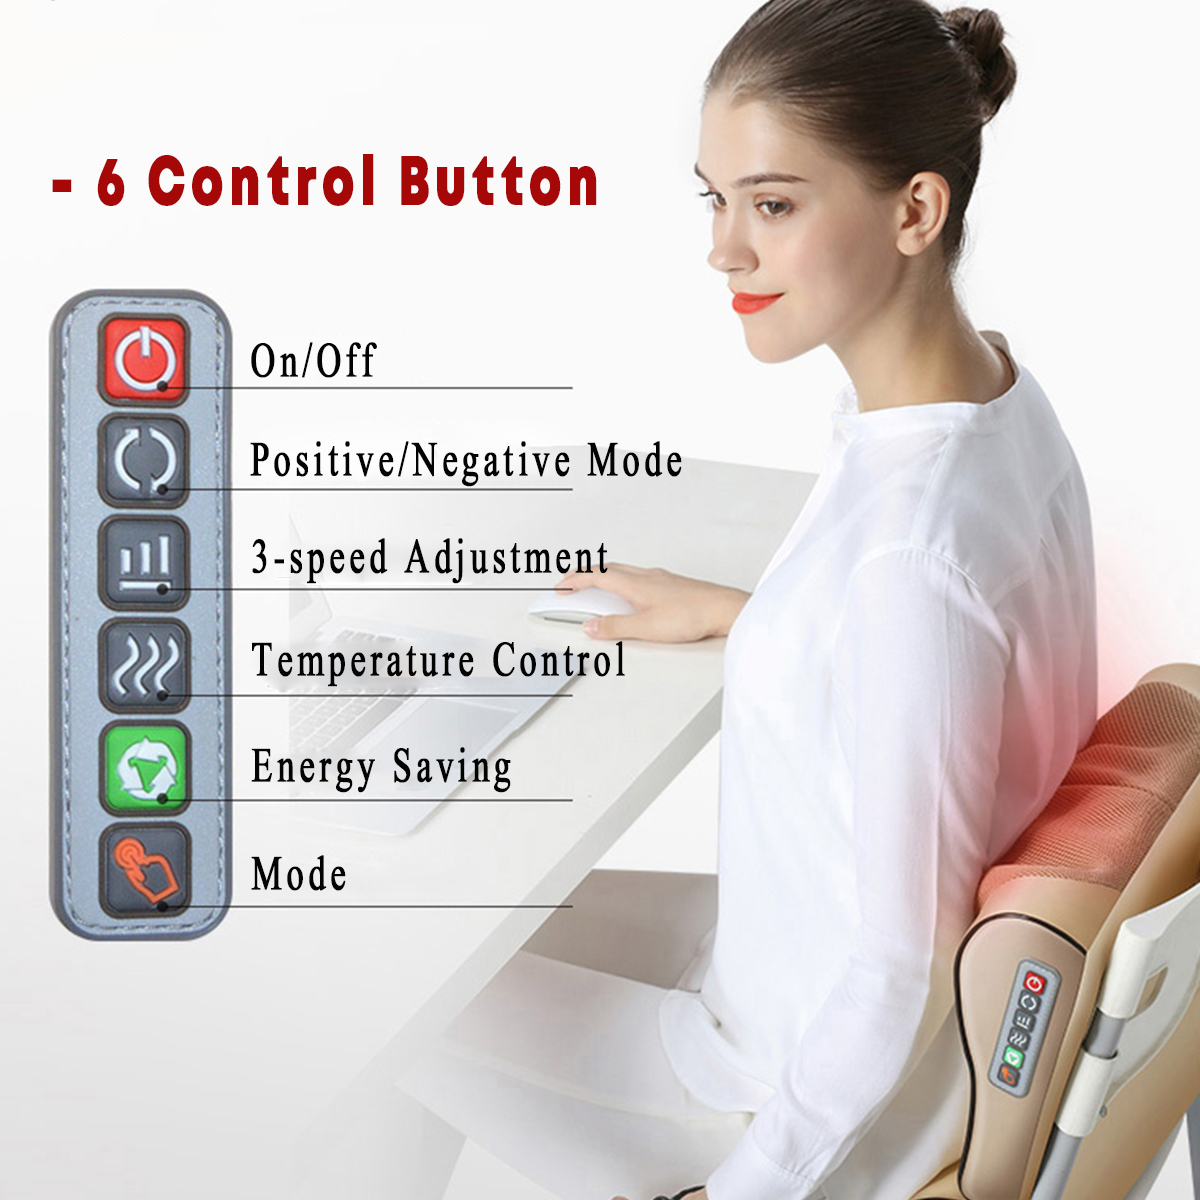 Electric-Massage-Pillow-Infrared-Heating-Neck-Shoulder-Back-Body-Massager-Device-1567188-5